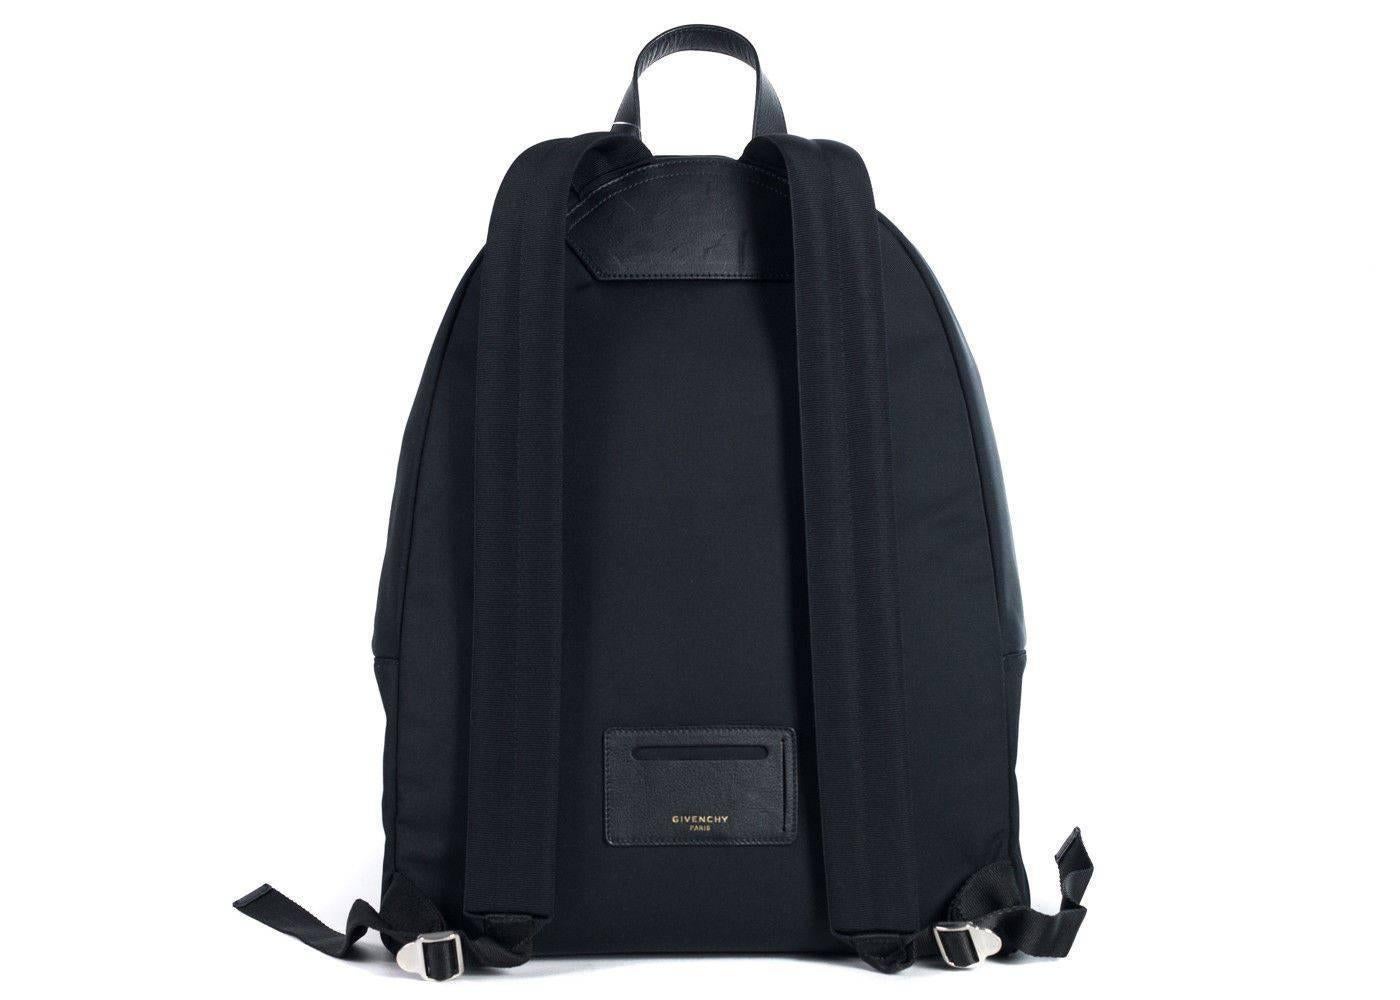 Brand New Givenchy Logo Front Backpack
Original Tag & Sleeper Bag
Retails in Stores & Online for $1350
Size 16.5 H x 6.7 D x 12 L

Update your wardrobe with Givenchy's Minimalist Backpack. This new addition is perfect for your essentials. This bag